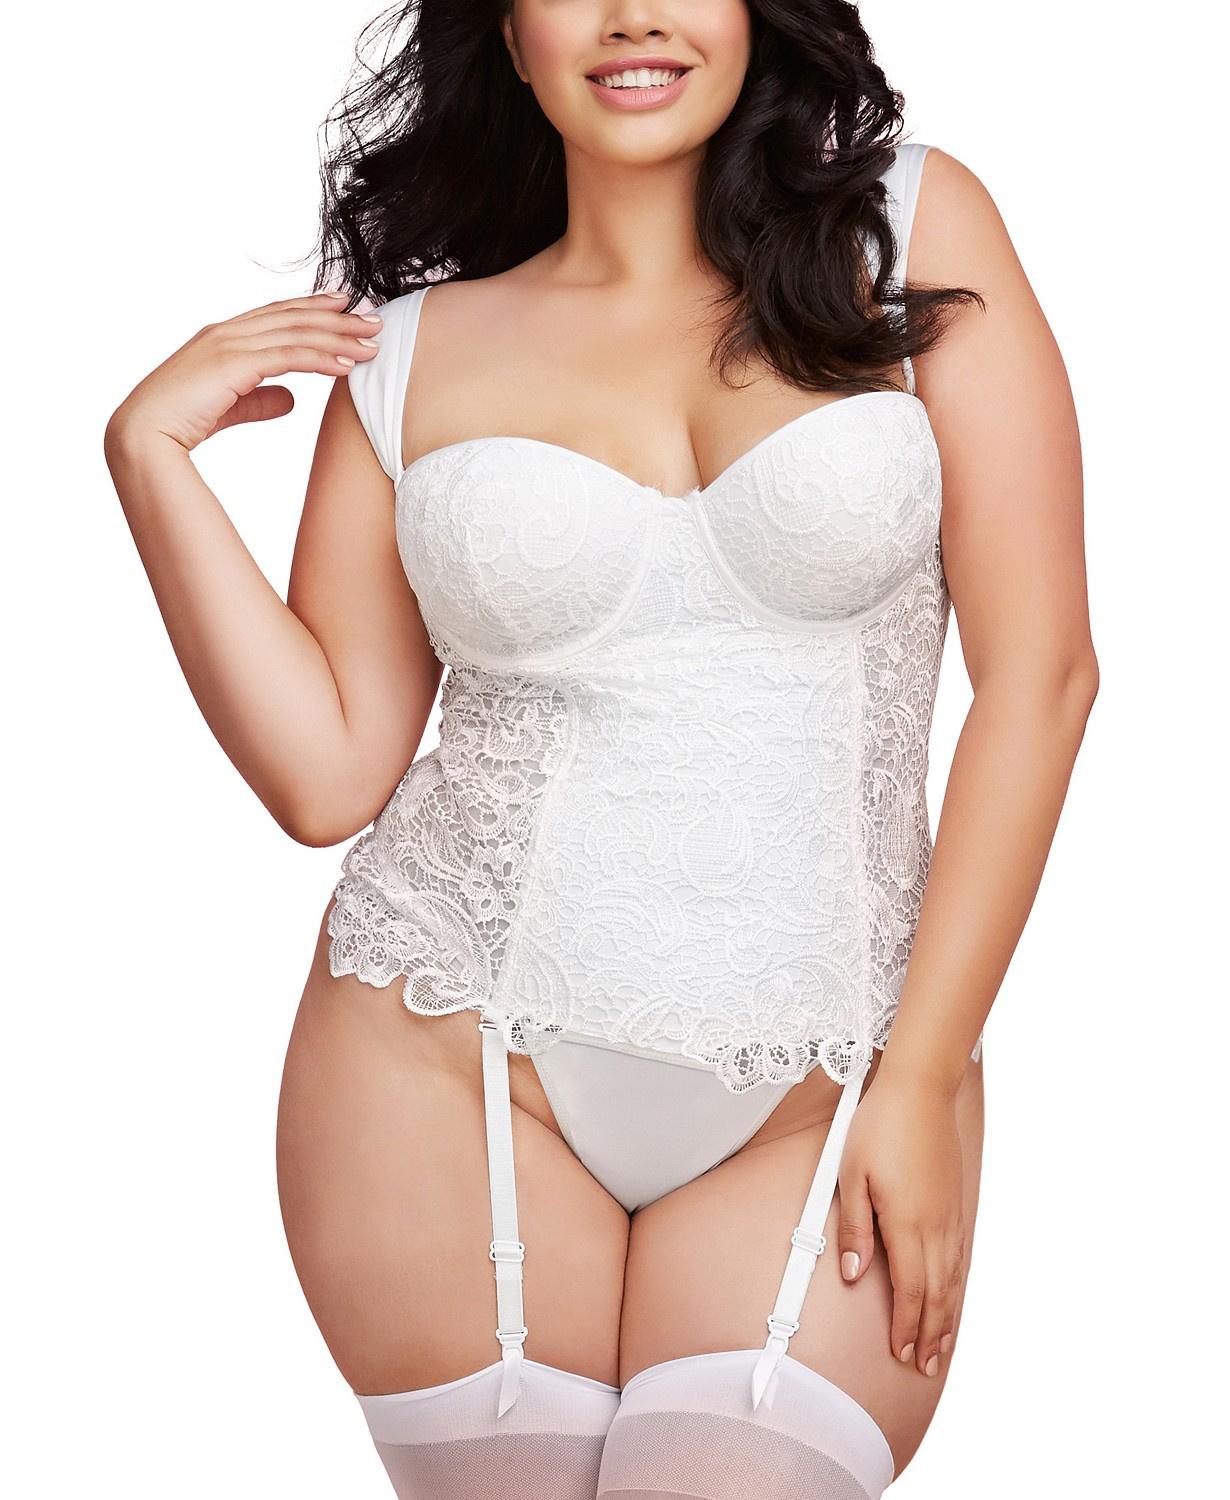 Black And White Lace Bridal Rozie Corsets With Bra Cup Sexy Strapless See  Through Wedding Lingerie From Tieshome, $13.57